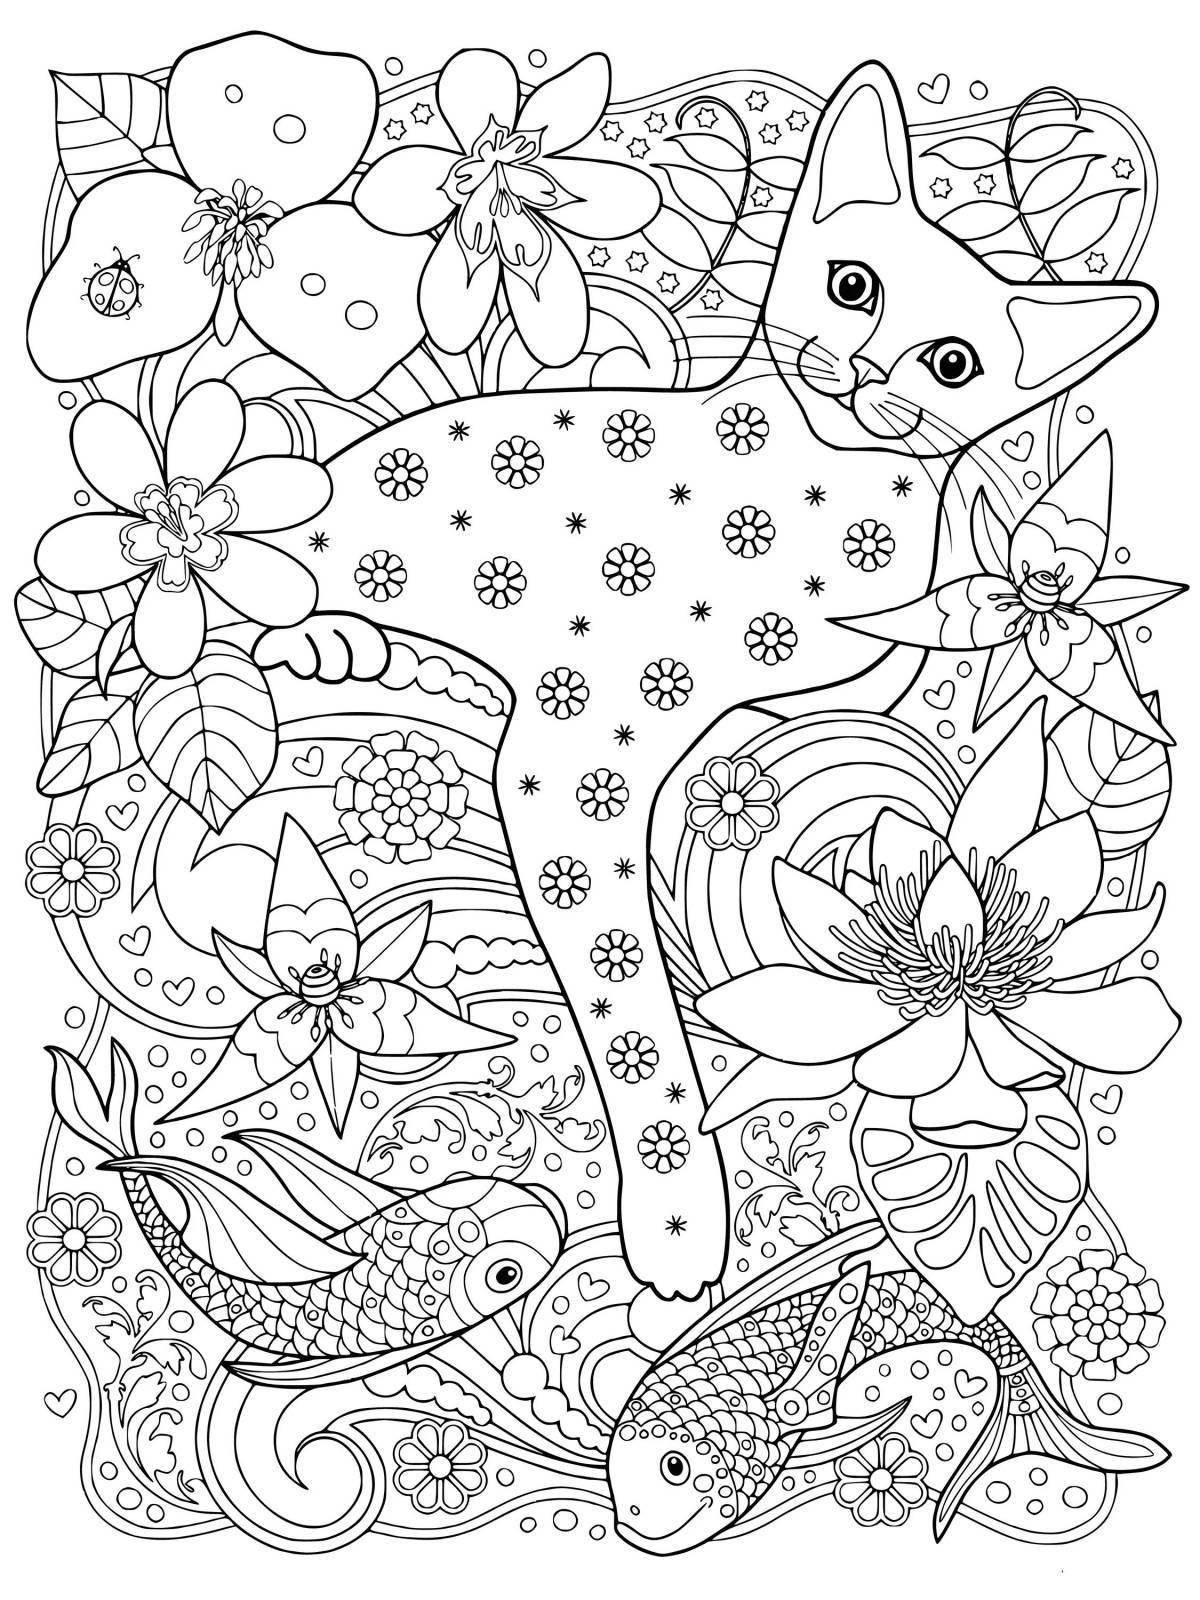 Live cat coloring page art